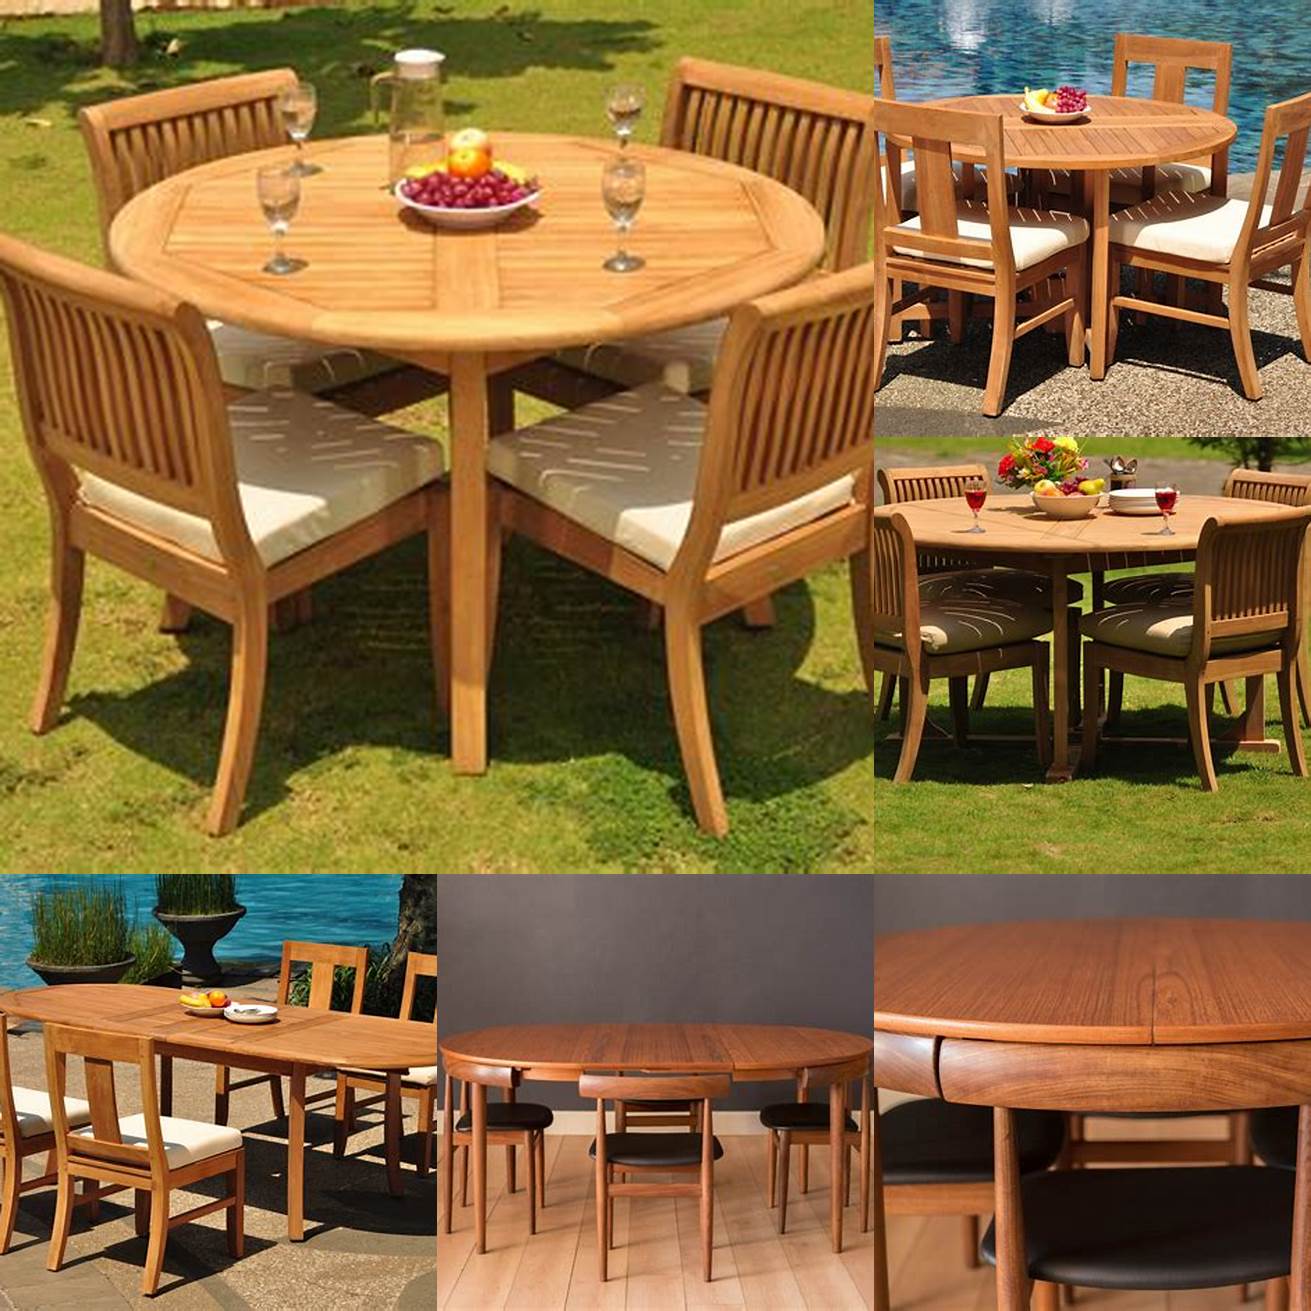 1 Round Teak Table with Armless Chairs